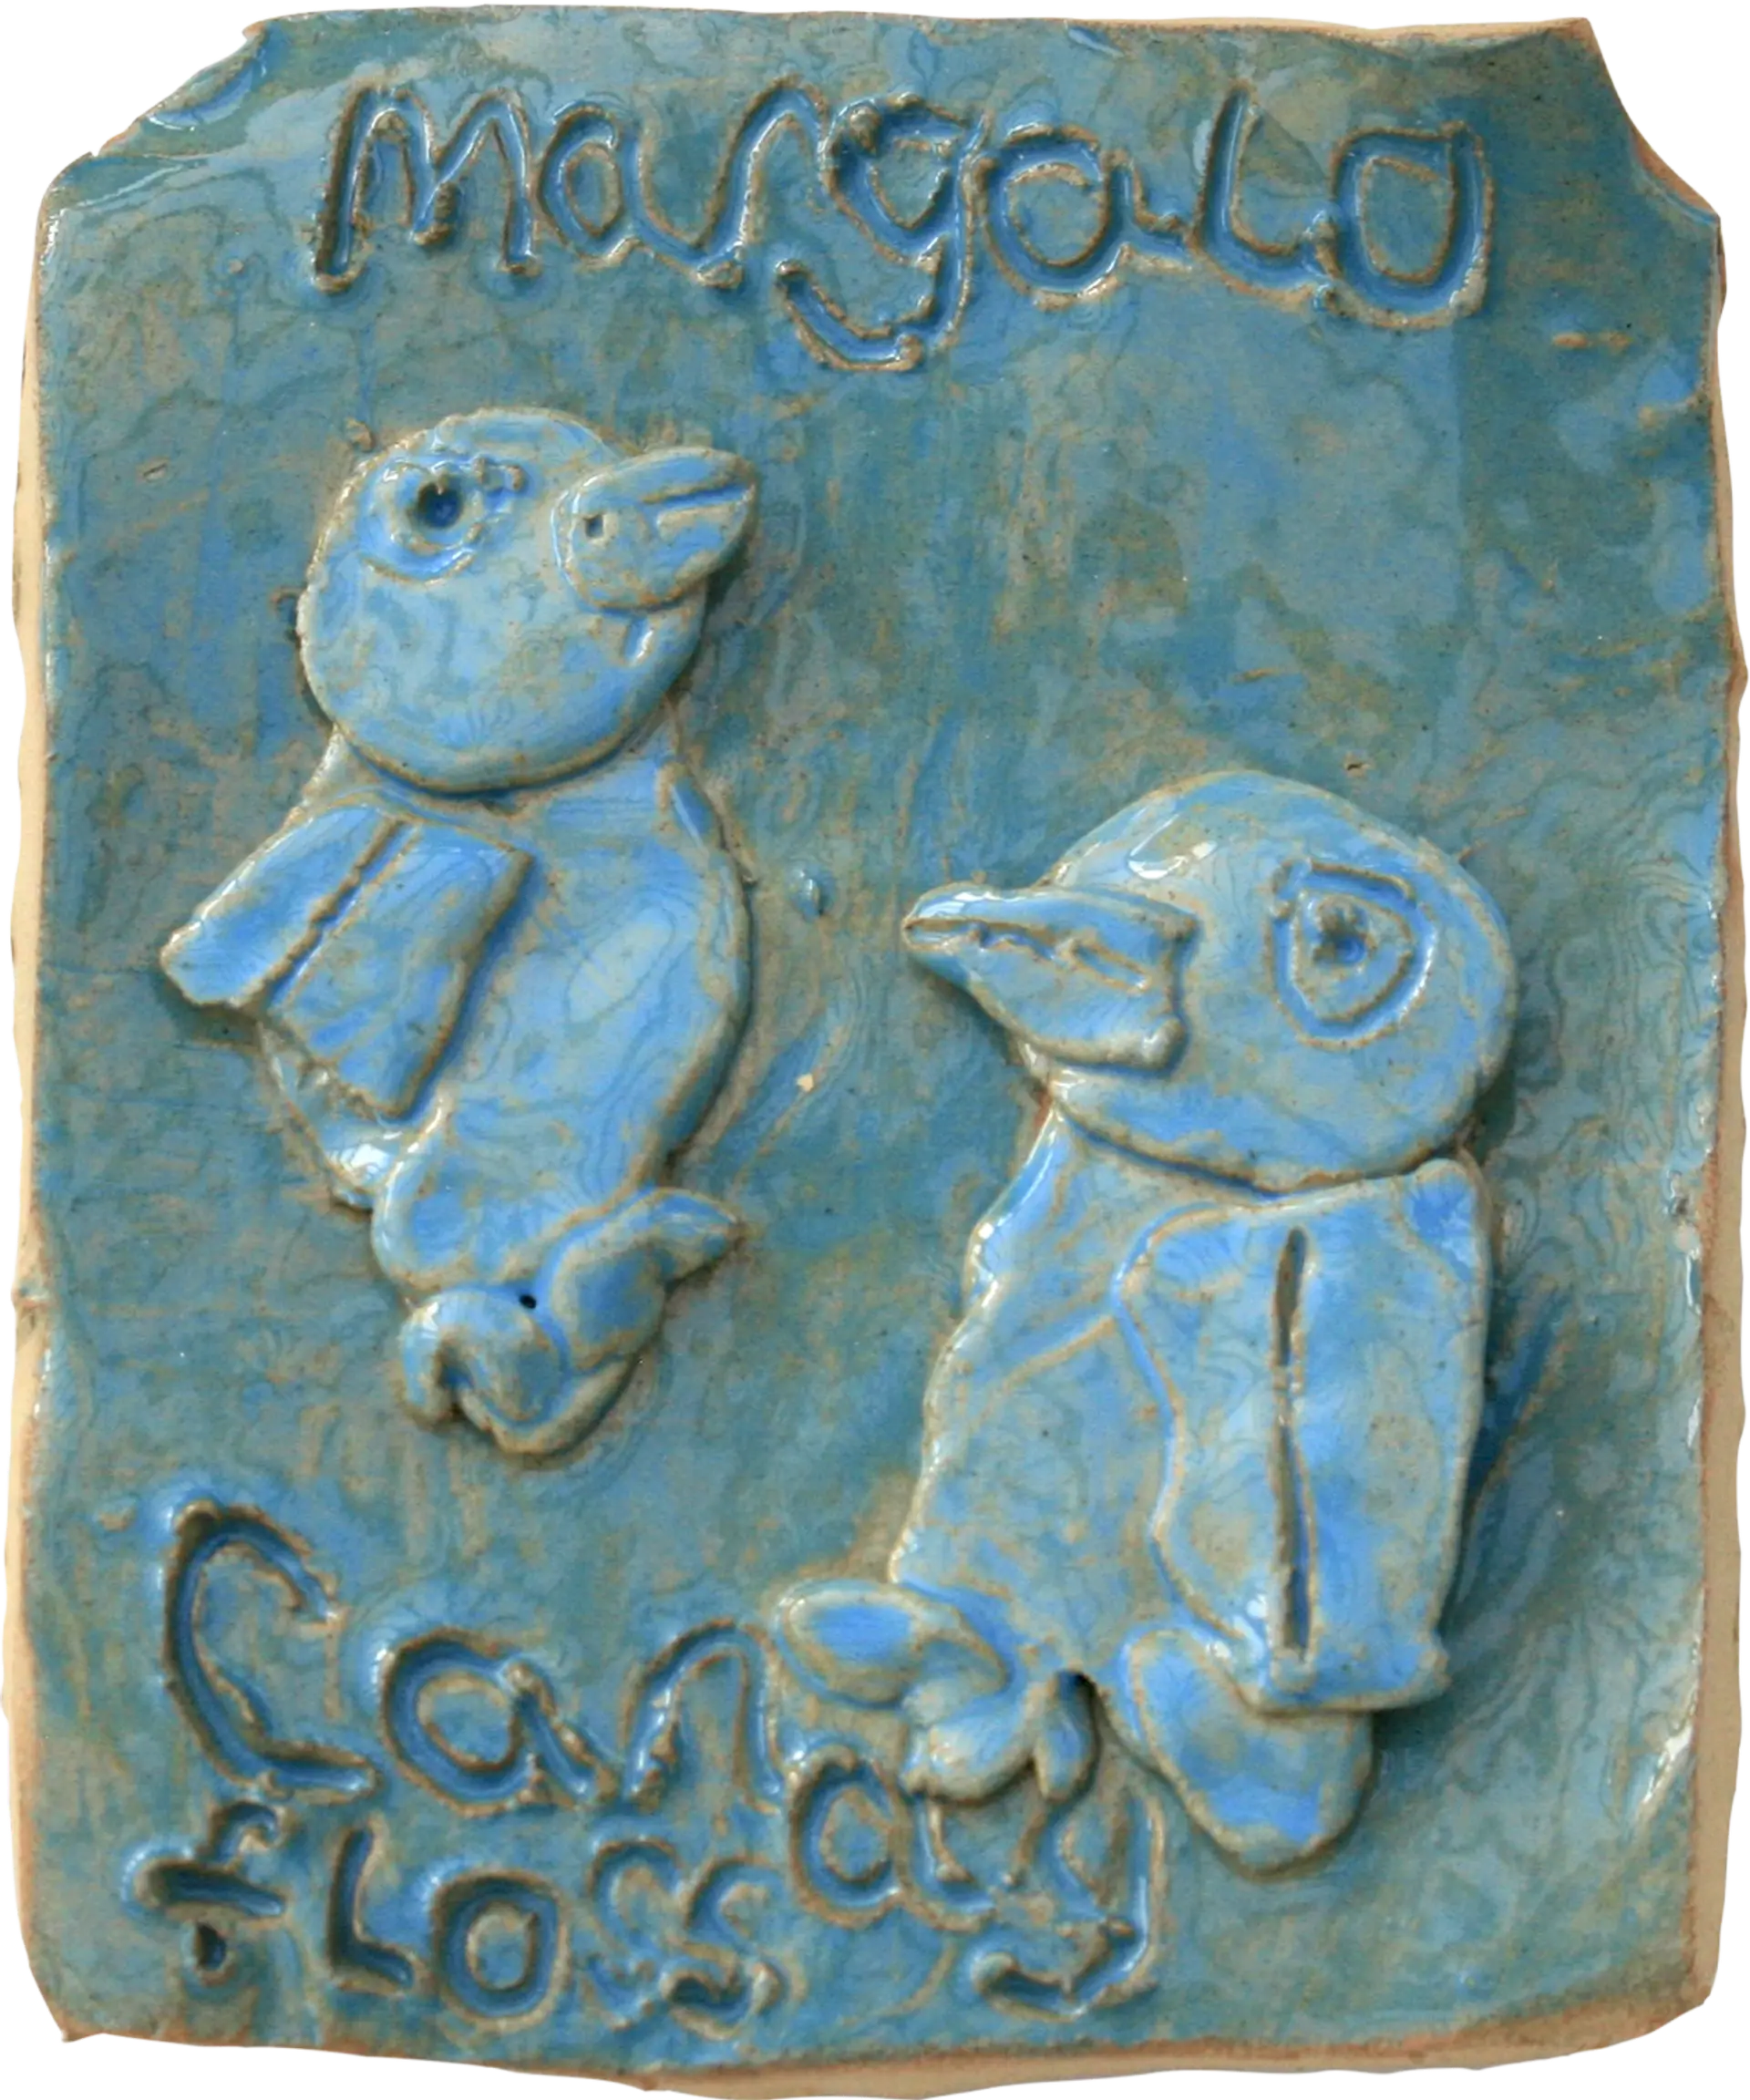 A blue glazed ceramic tile of Jessica’s canaries, their names ‘Margolo’ and ‘Candyfloss’ are carved into the tile. 